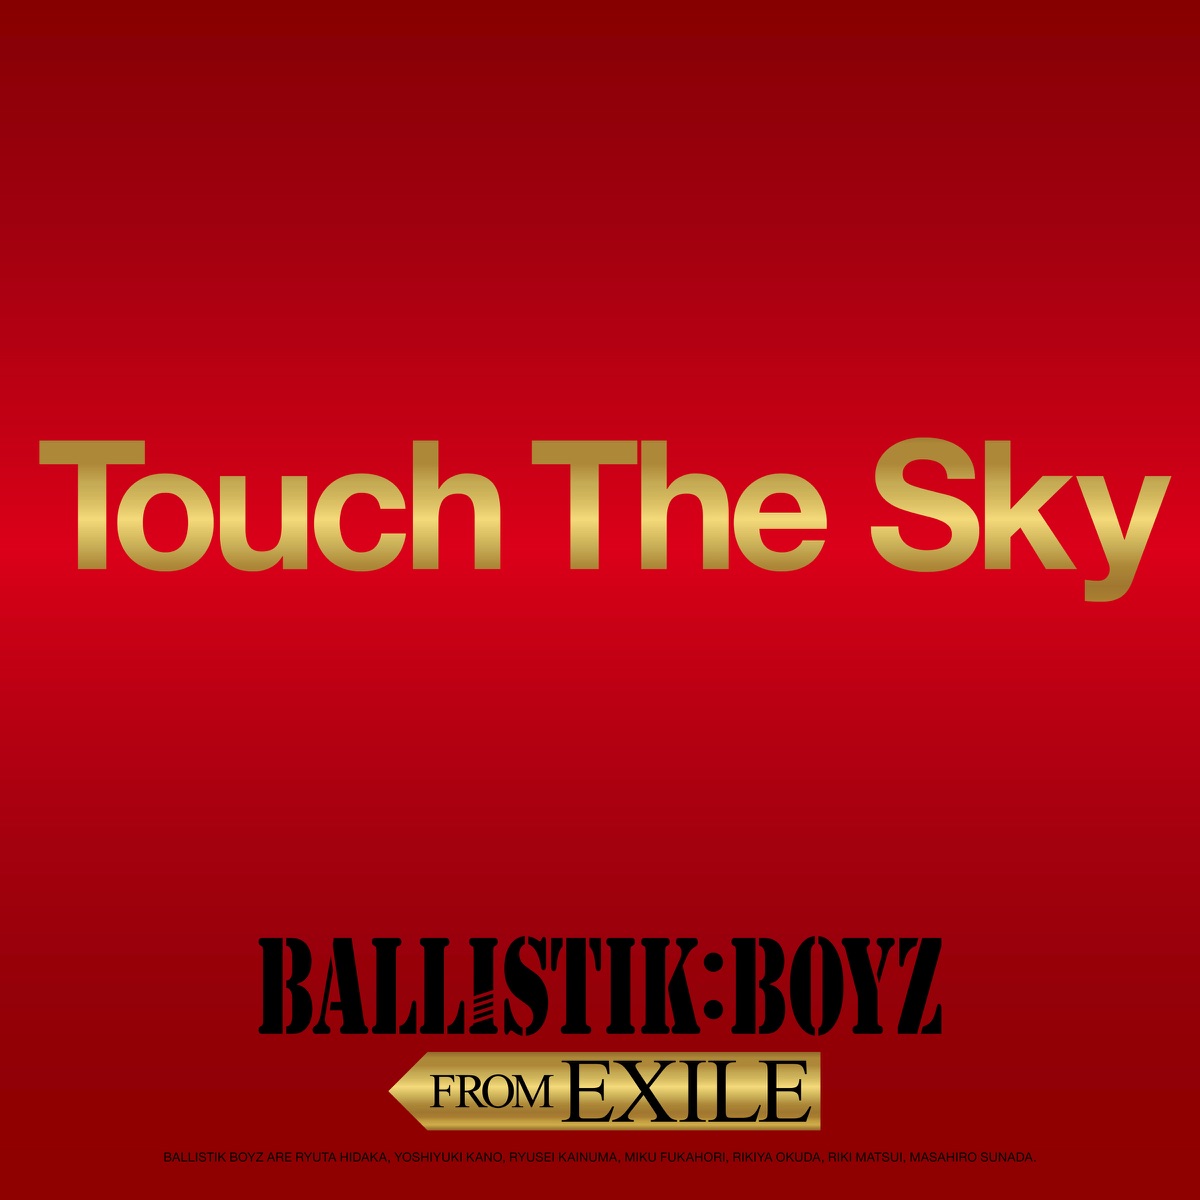 『BALLISTIK BOYZ from EXILE TRIBE - Touch The Sky』収録の『Touch The Sky』ジャケット